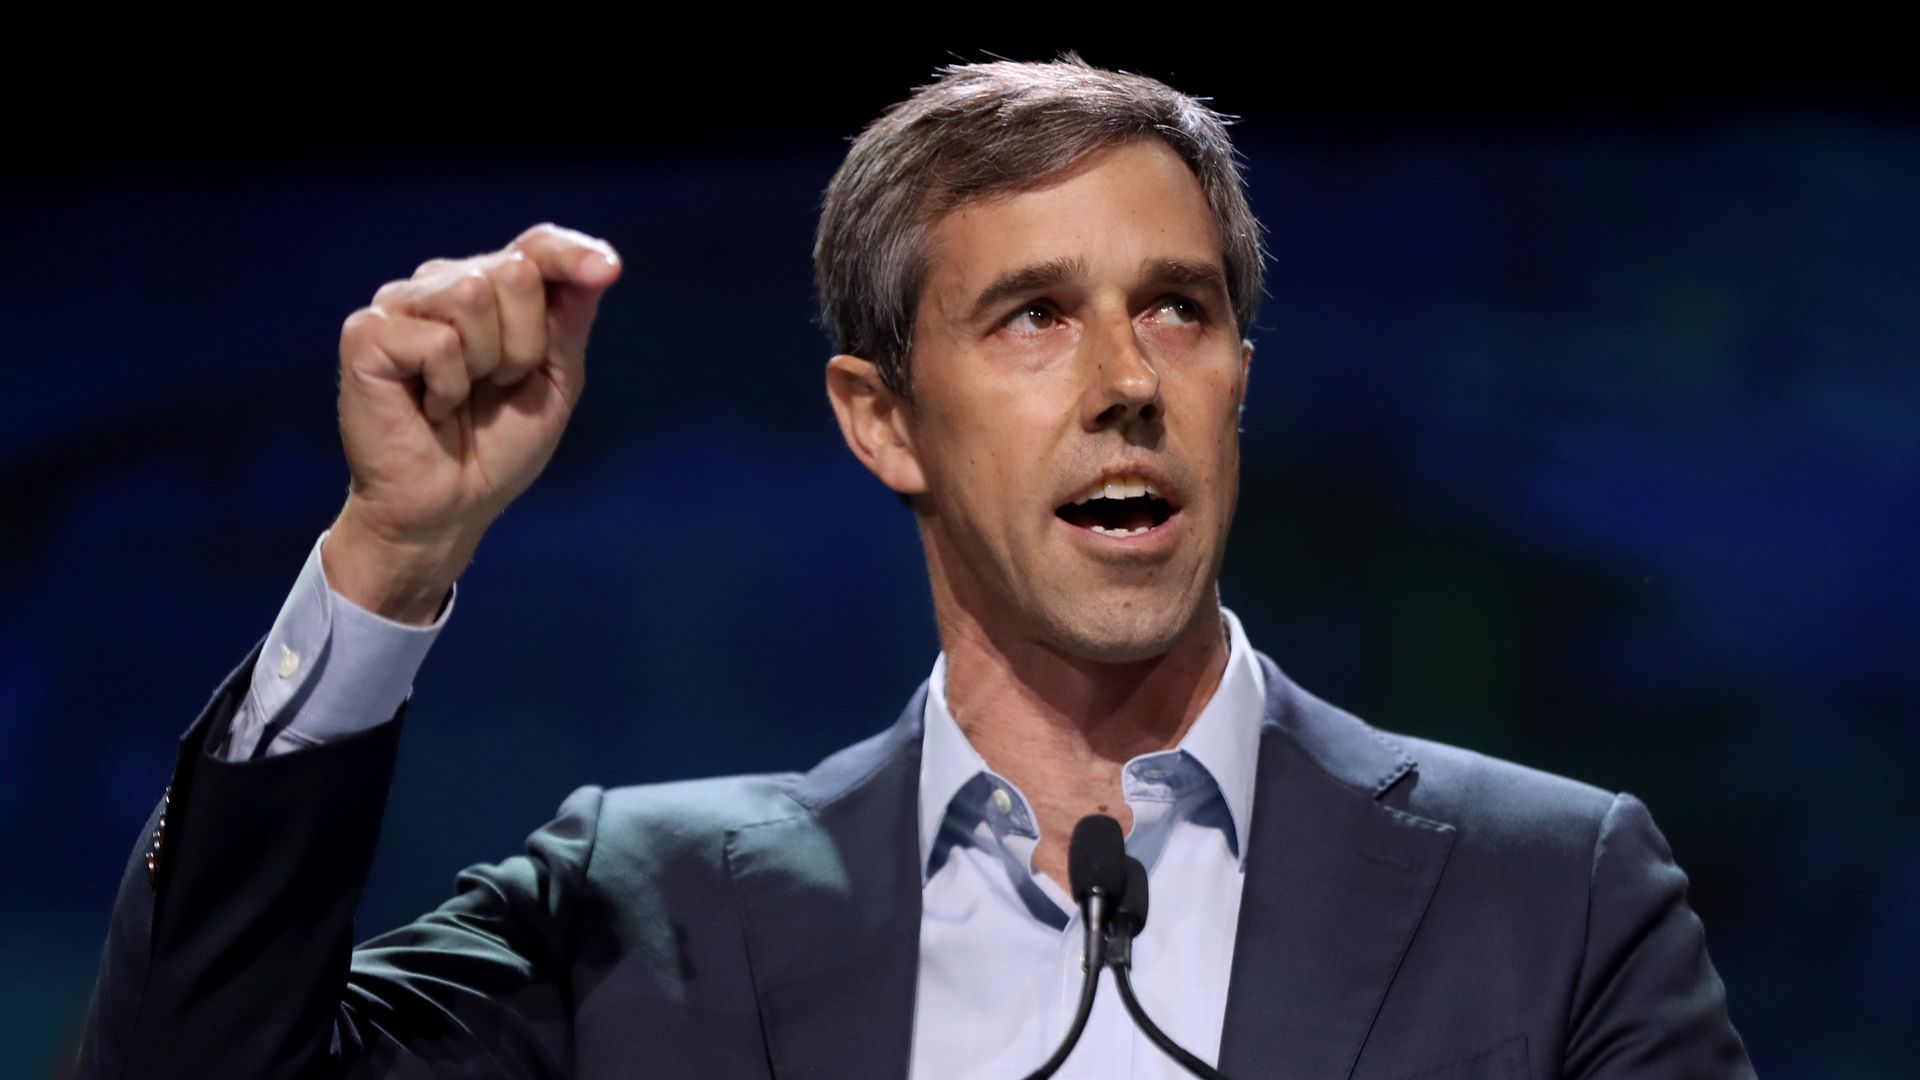 Democratic presidential candidate Beto O'Rourke speaks during Day 2 of the California Democratic Party Convention at the Moscone Convention Center in San Francisco, Calif., on Saturday, June 1, 2019.